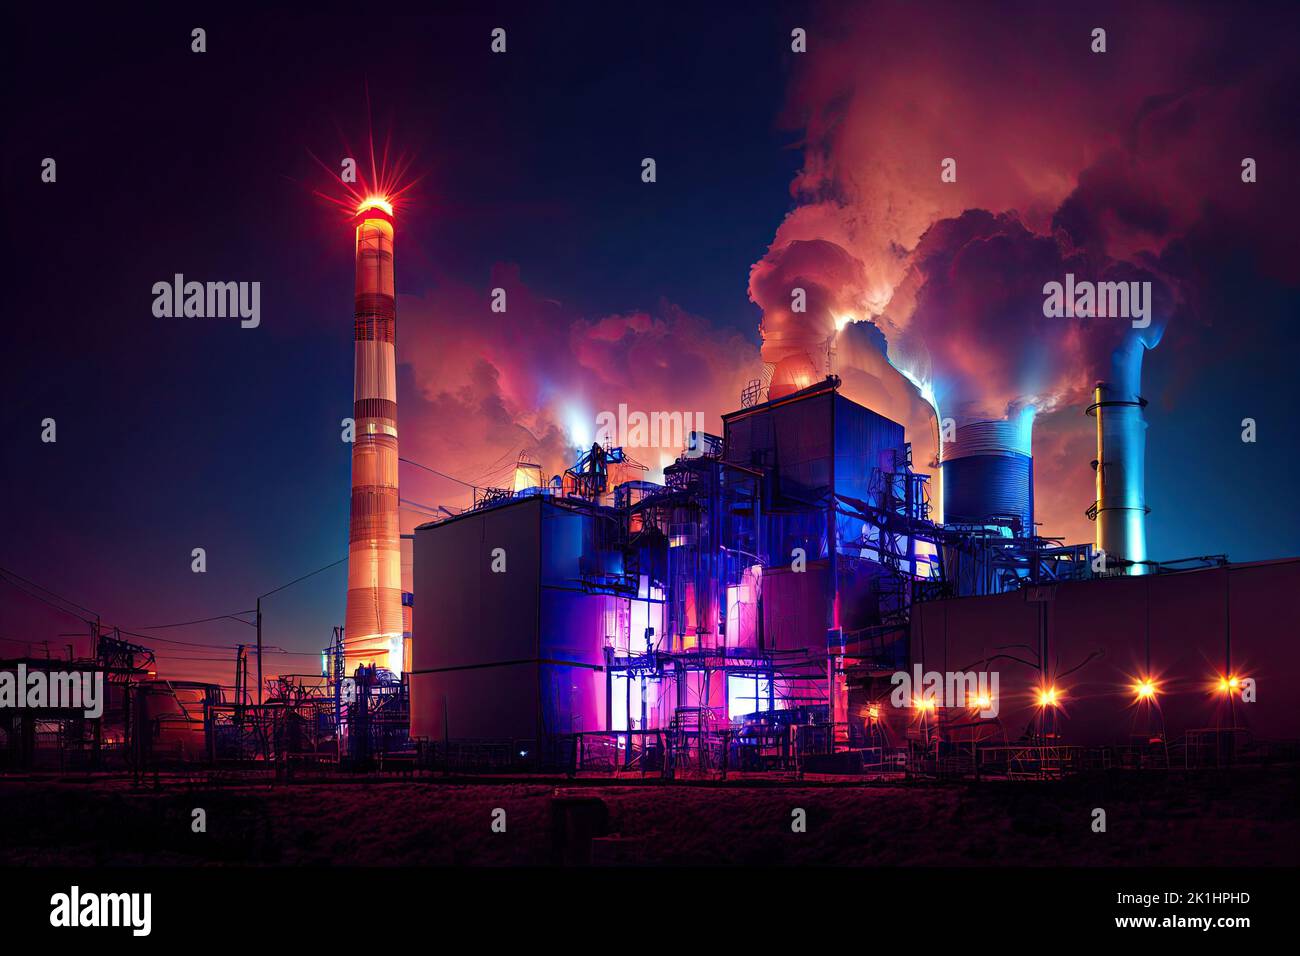 A brightly lit chemicals factory at night, with colourful neon lights. Pipelines and smokestacks with rising smoke, symbolizing pollution and rising Stock Photo